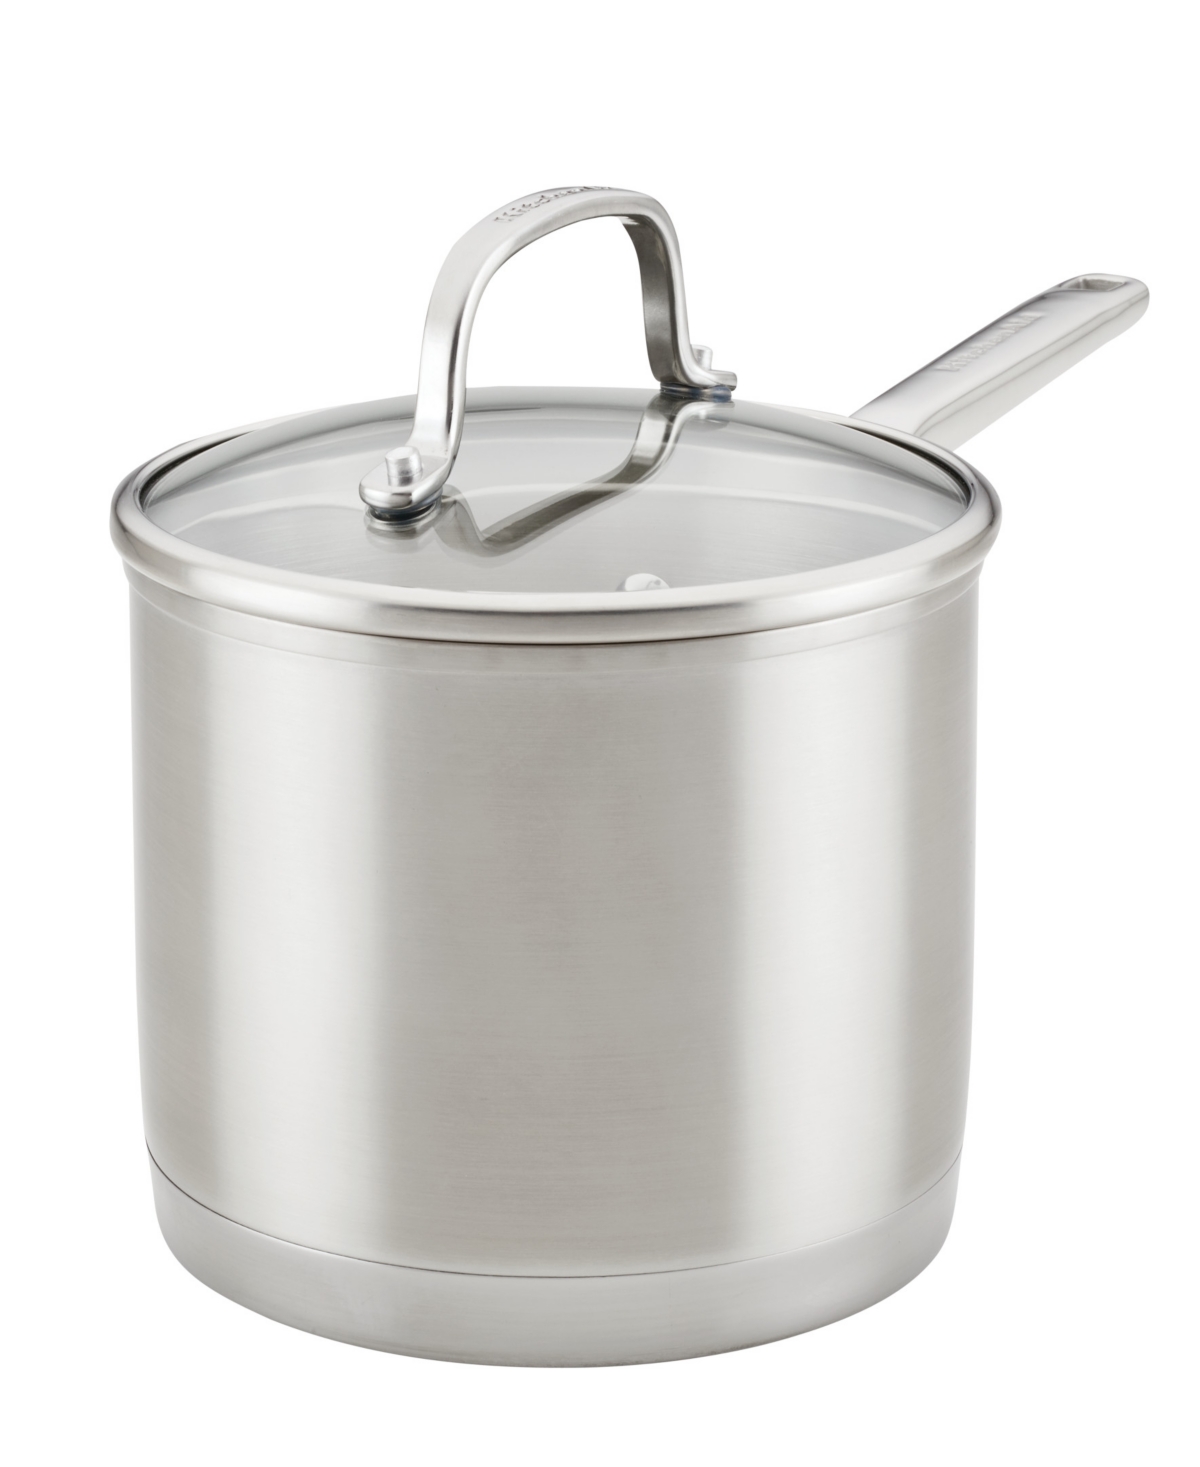 Kitchenaid 3 Ply Base Stainless Steel 3 Quart Saucepan With Lid In Brushed Stainless Steel